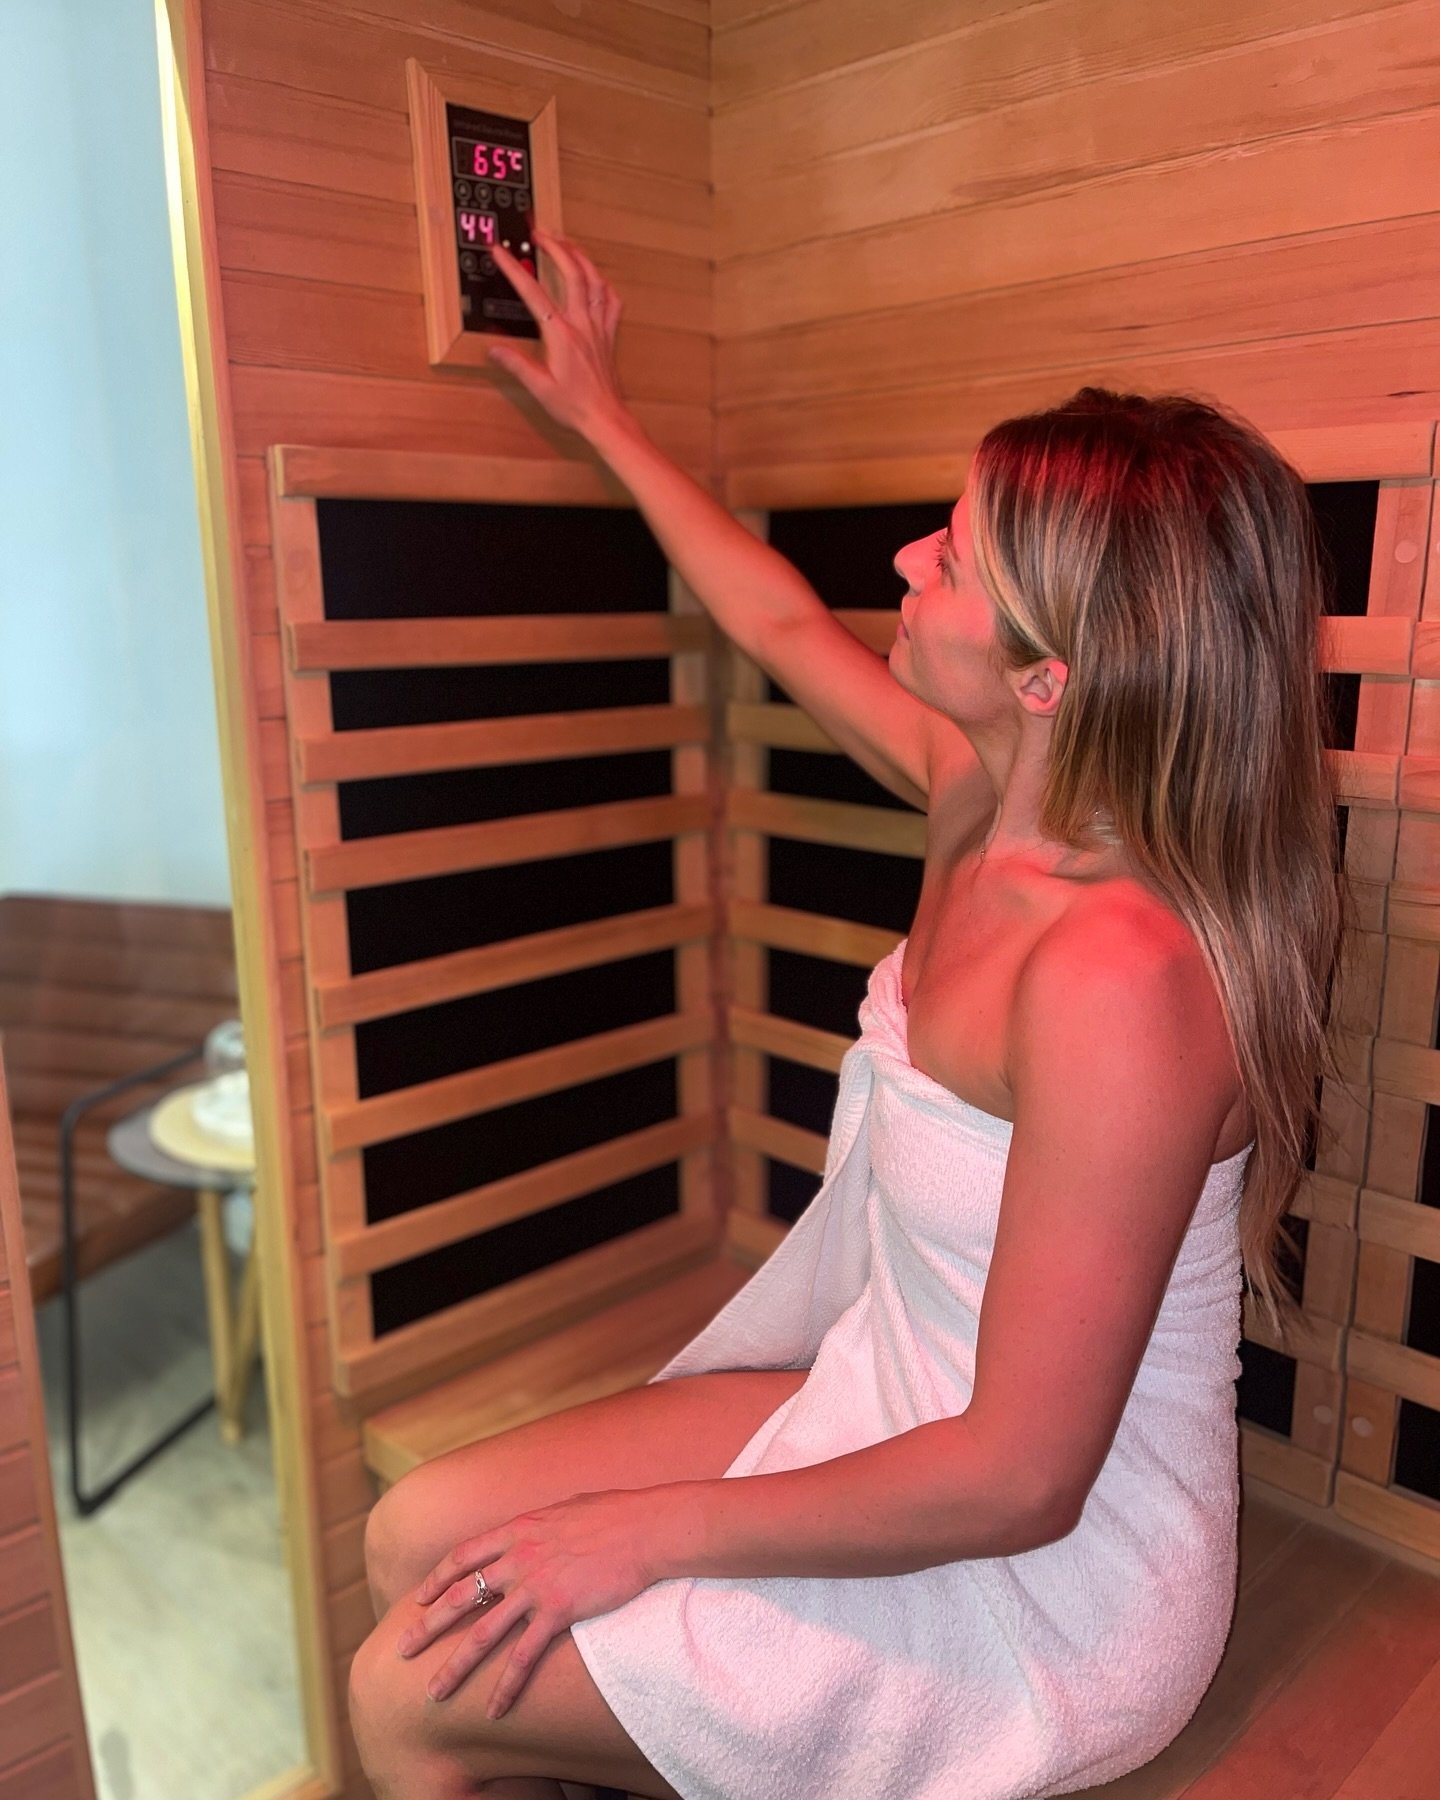 🔥 Revitalise your body and soothe your muscles post-physiotherapy treatment with our Infrared Sauna $10 add-on service! 🔥 

~ Infrared Sauna sessions are recognized for their ability to induce relaxation and alleviate stress. The heat penetrates de